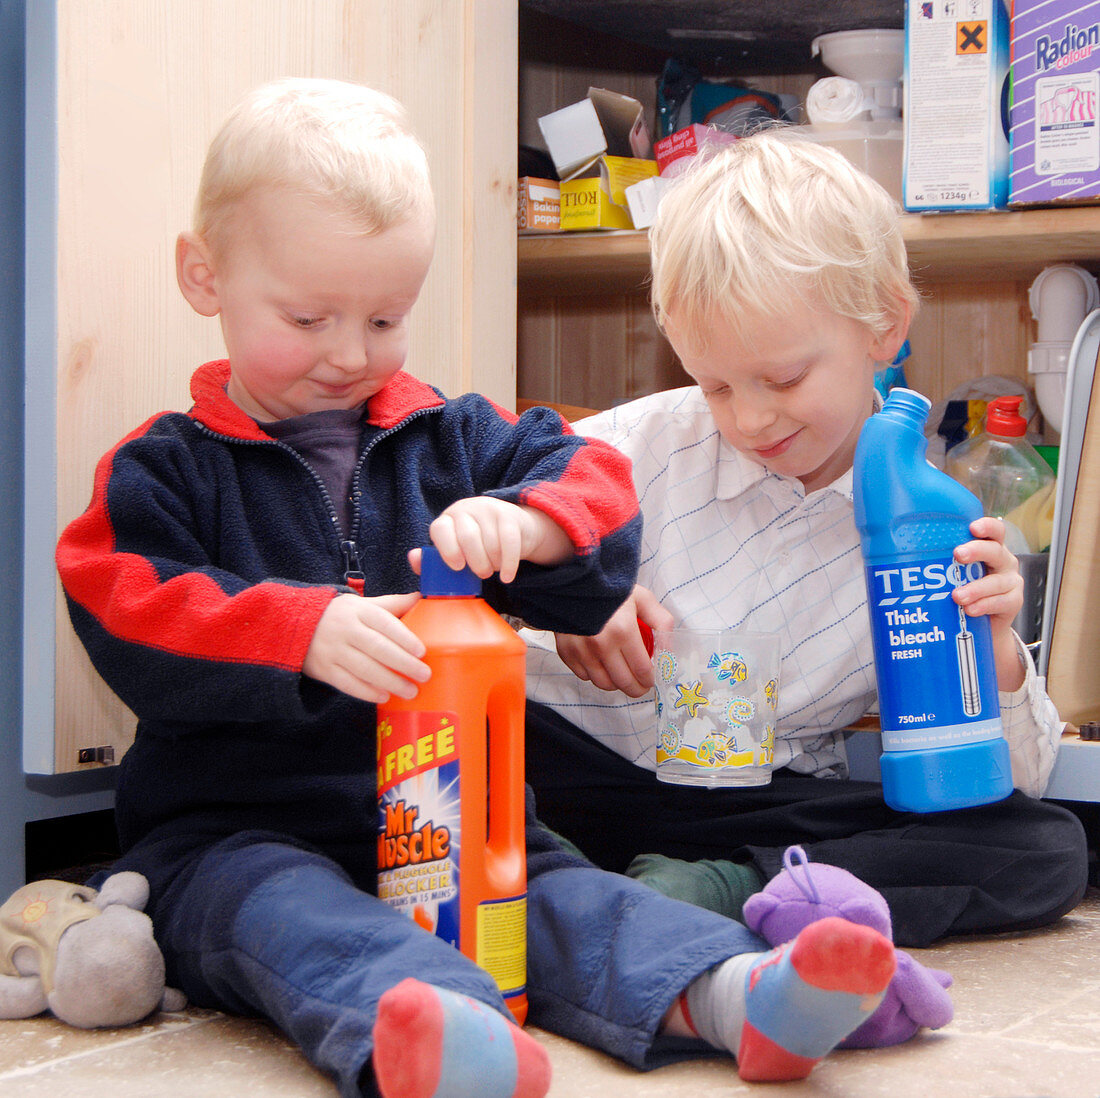 Children playing with cleaning products